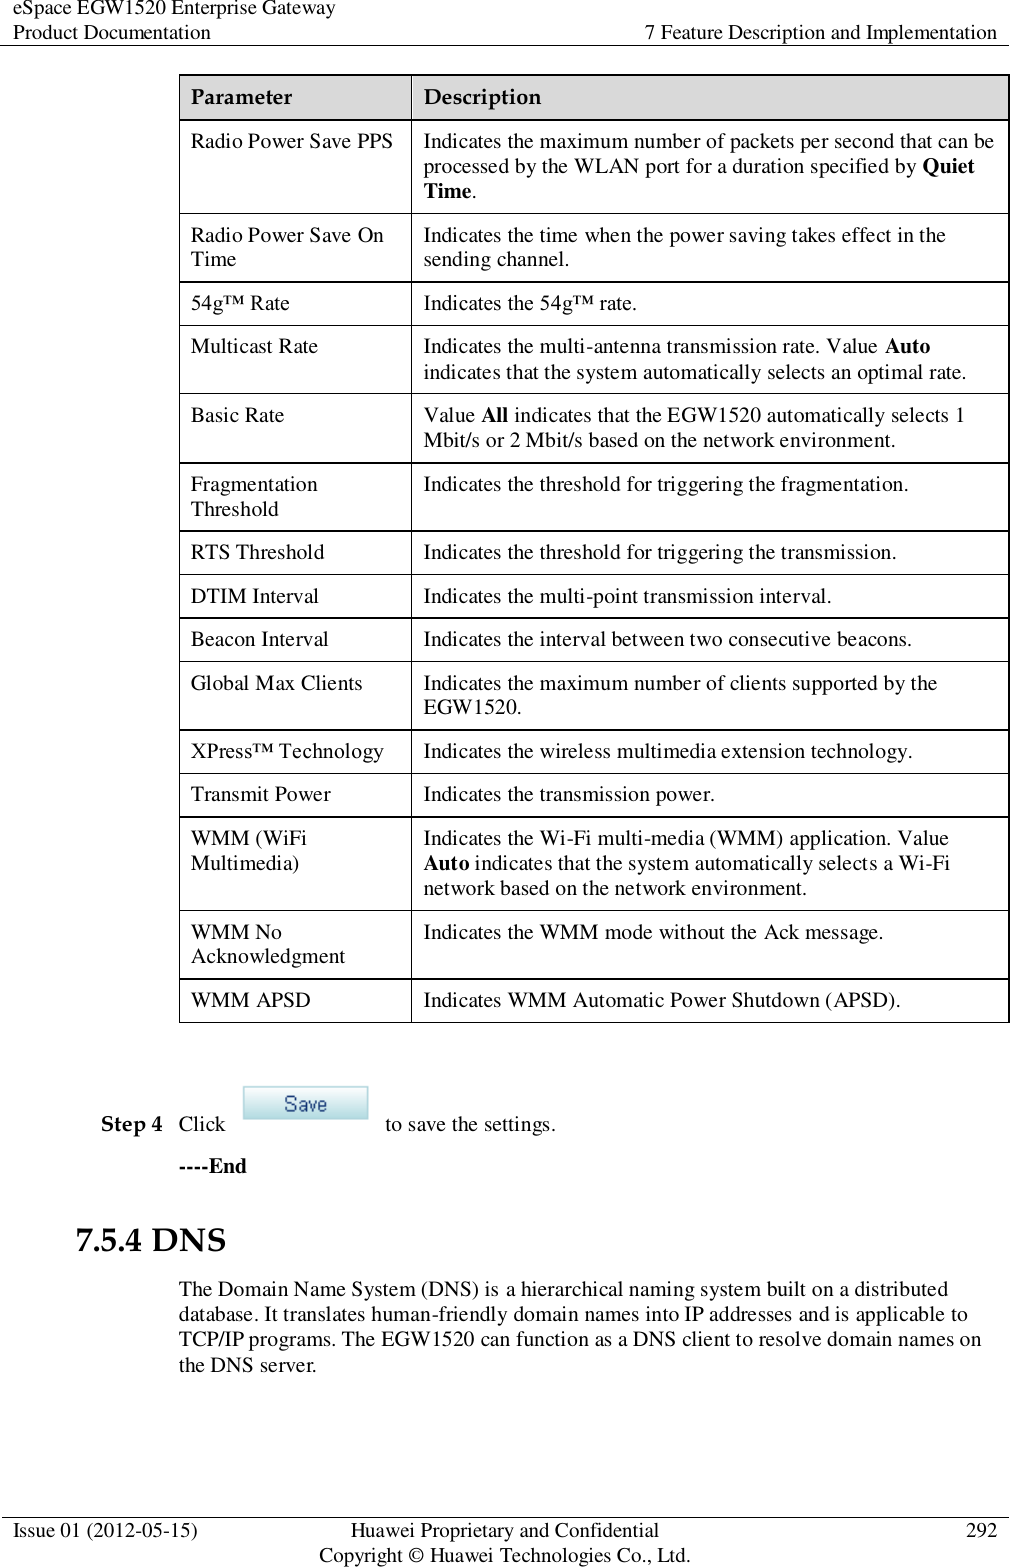 eSpace EGW1520 Enterprise Gateway Product Documentation 7 Feature Description and Implementation  Issue 01 (2012-05-15) Huawei Proprietary and Confidential                                     Copyright © Huawei Technologies Co., Ltd. 292  Parameter Description Radio Power Save PPS Indicates the maximum number of packets per second that can be processed by the WLAN port for a duration specified by Quiet Time. Radio Power Save On Time Indicates the time when the power saving takes effect in the sending channel. 54g™ Rate Indicates the 54g™ rate. Multicast Rate Indicates the multi-antenna transmission rate. Value Auto indicates that the system automatically selects an optimal rate. Basic Rate Value All indicates that the EGW1520 automatically selects 1 Mbit/s or 2 Mbit/s based on the network environment. Fragmentation Threshold Indicates the threshold for triggering the fragmentation. RTS Threshold Indicates the threshold for triggering the transmission. DTIM Interval Indicates the multi-point transmission interval. Beacon Interval Indicates the interval between two consecutive beacons. Global Max Clients Indicates the maximum number of clients supported by the EGW1520. XPress™ Technology Indicates the wireless multimedia extension technology. Transmit Power Indicates the transmission power. WMM (WiFi Multimedia) Indicates the Wi-Fi multi-media (WMM) application. Value Auto indicates that the system automatically selects a Wi-Fi network based on the network environment. WMM No Acknowledgment Indicates the WMM mode without the Ack message. WMM APSD   Indicates WMM Automatic Power Shutdown (APSD).  Step 4 Click    to save the settings. ----End 7.5.4 DNS The Domain Name System (DNS) is a hierarchical naming system built on a distributed database. It translates human-friendly domain names into IP addresses and is applicable to TCP/IP programs. The EGW1520 can function as a DNS client to resolve domain names on the DNS server.   